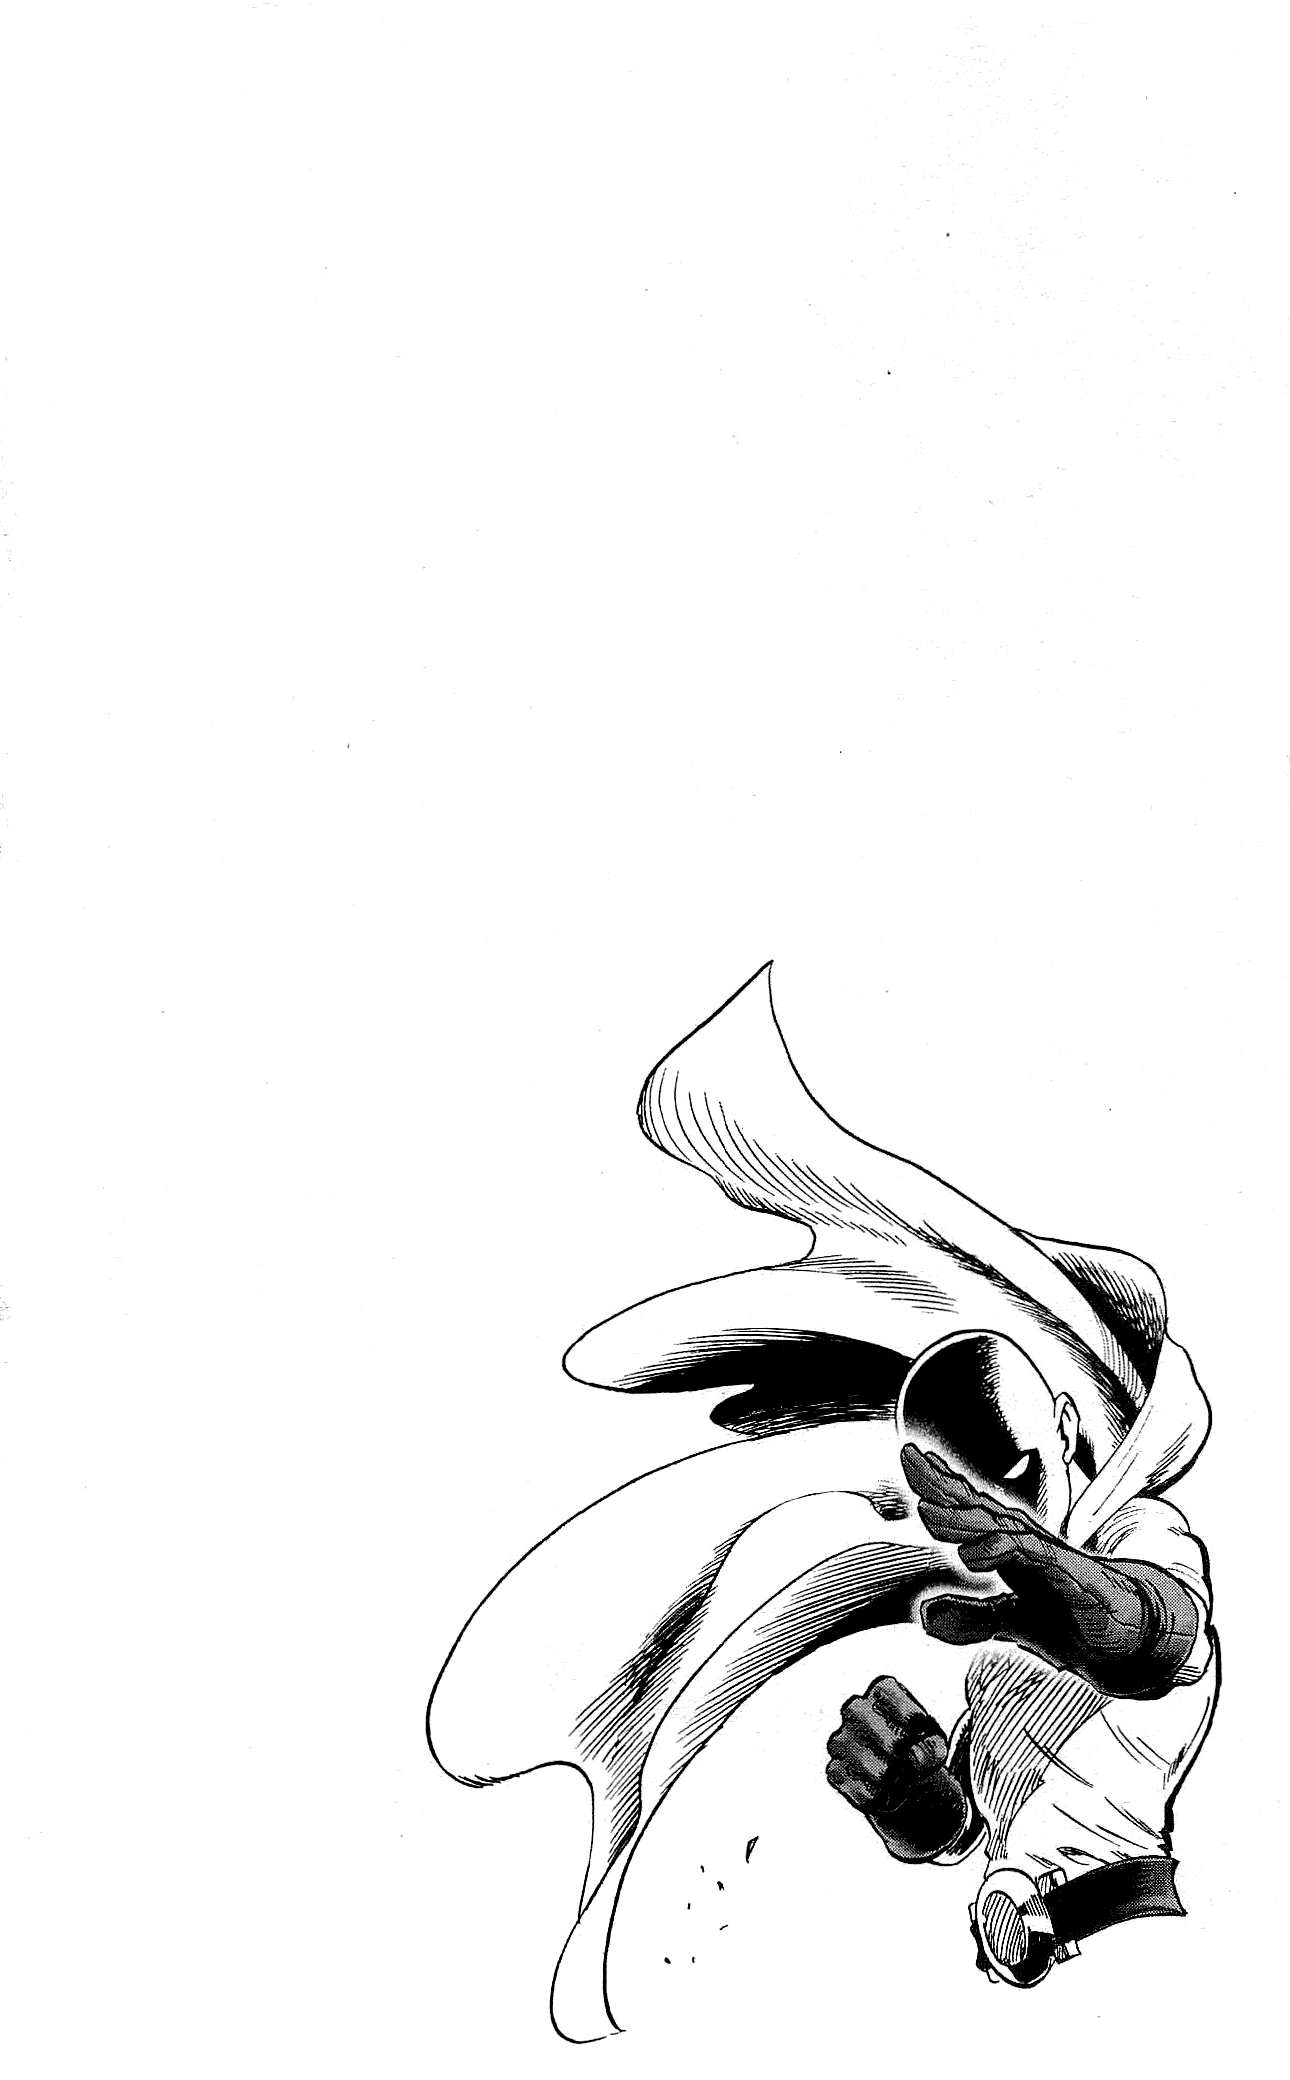 One Punch Man, Chapter 22 - Voice image 38